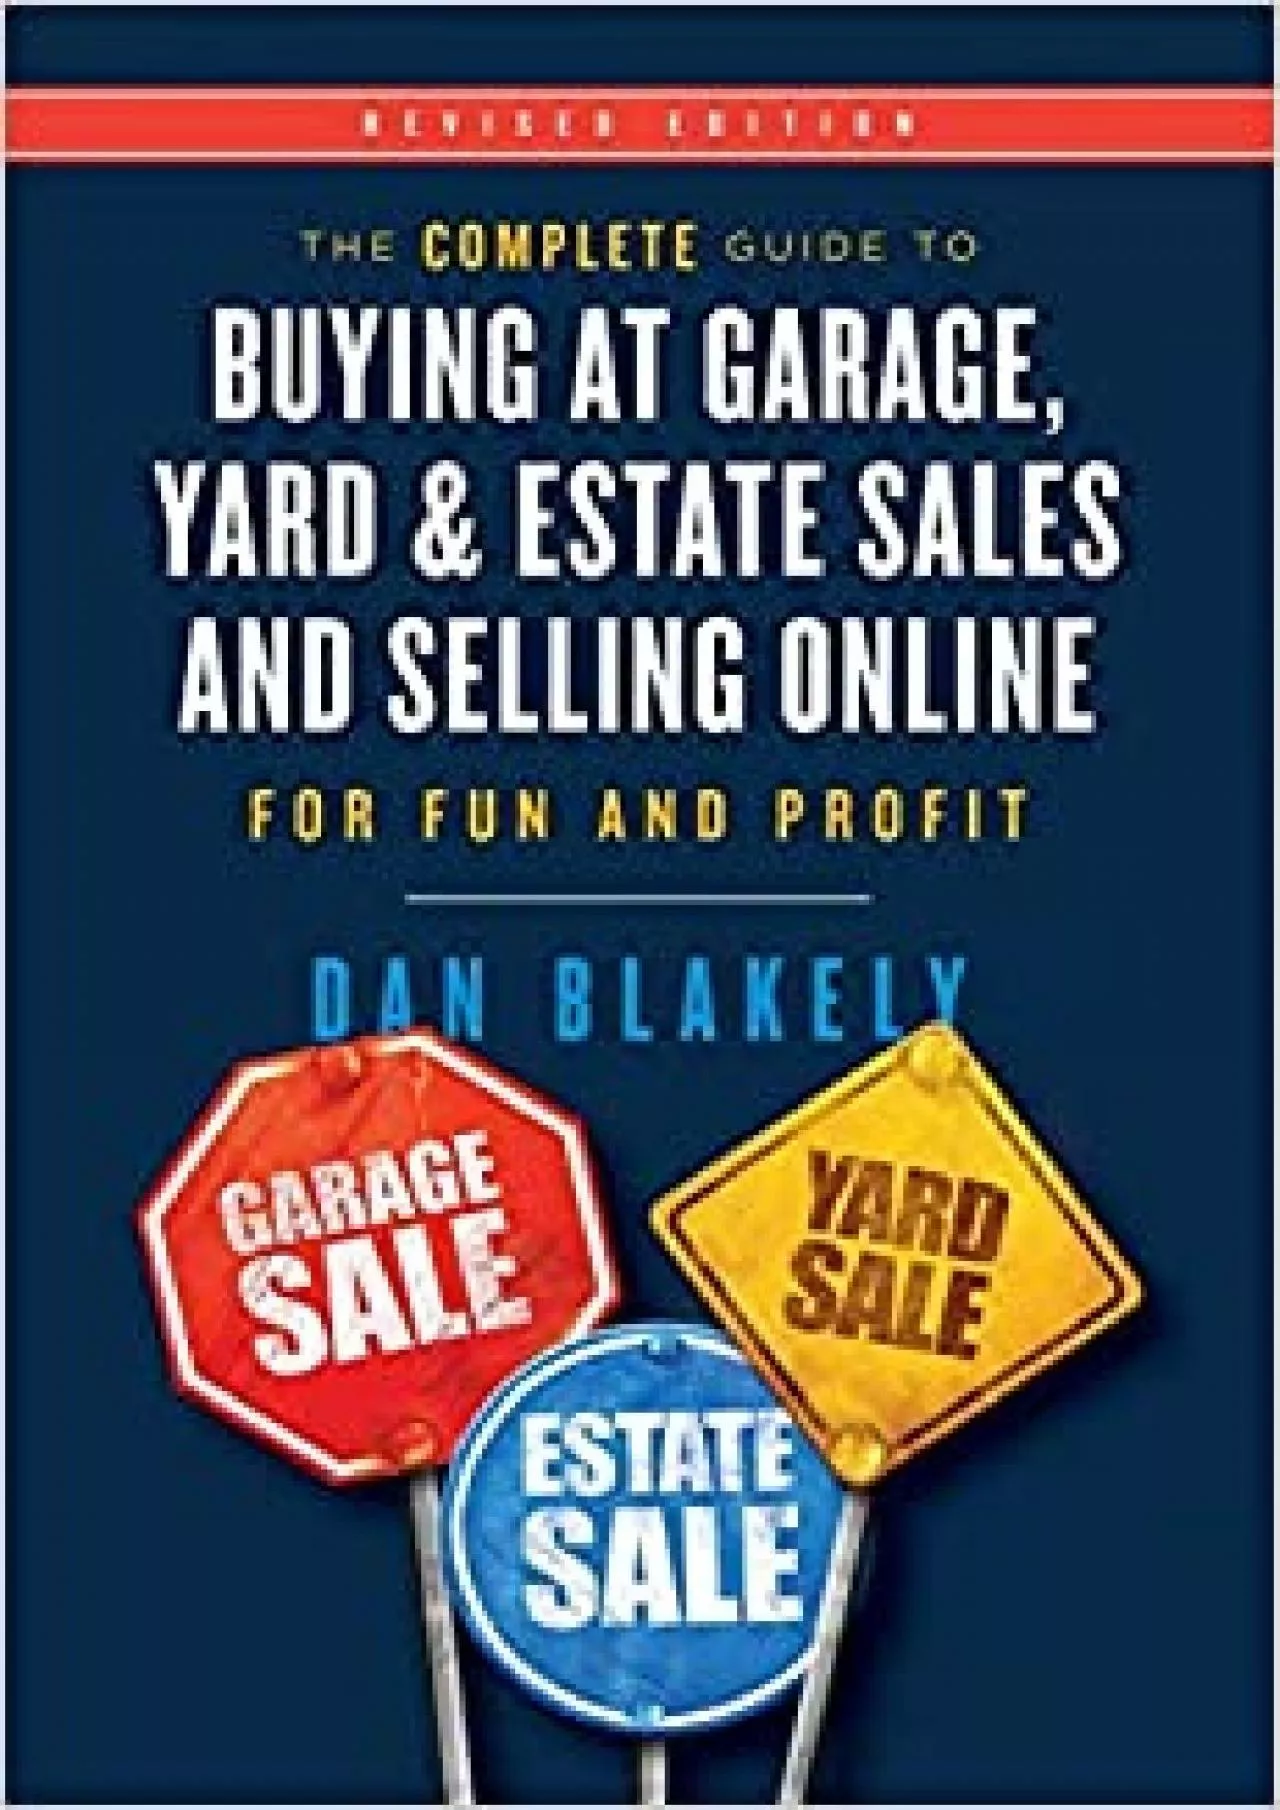 The Complete Guide to Buying at Garage, Yard, and Estate Sales and Selling Online for